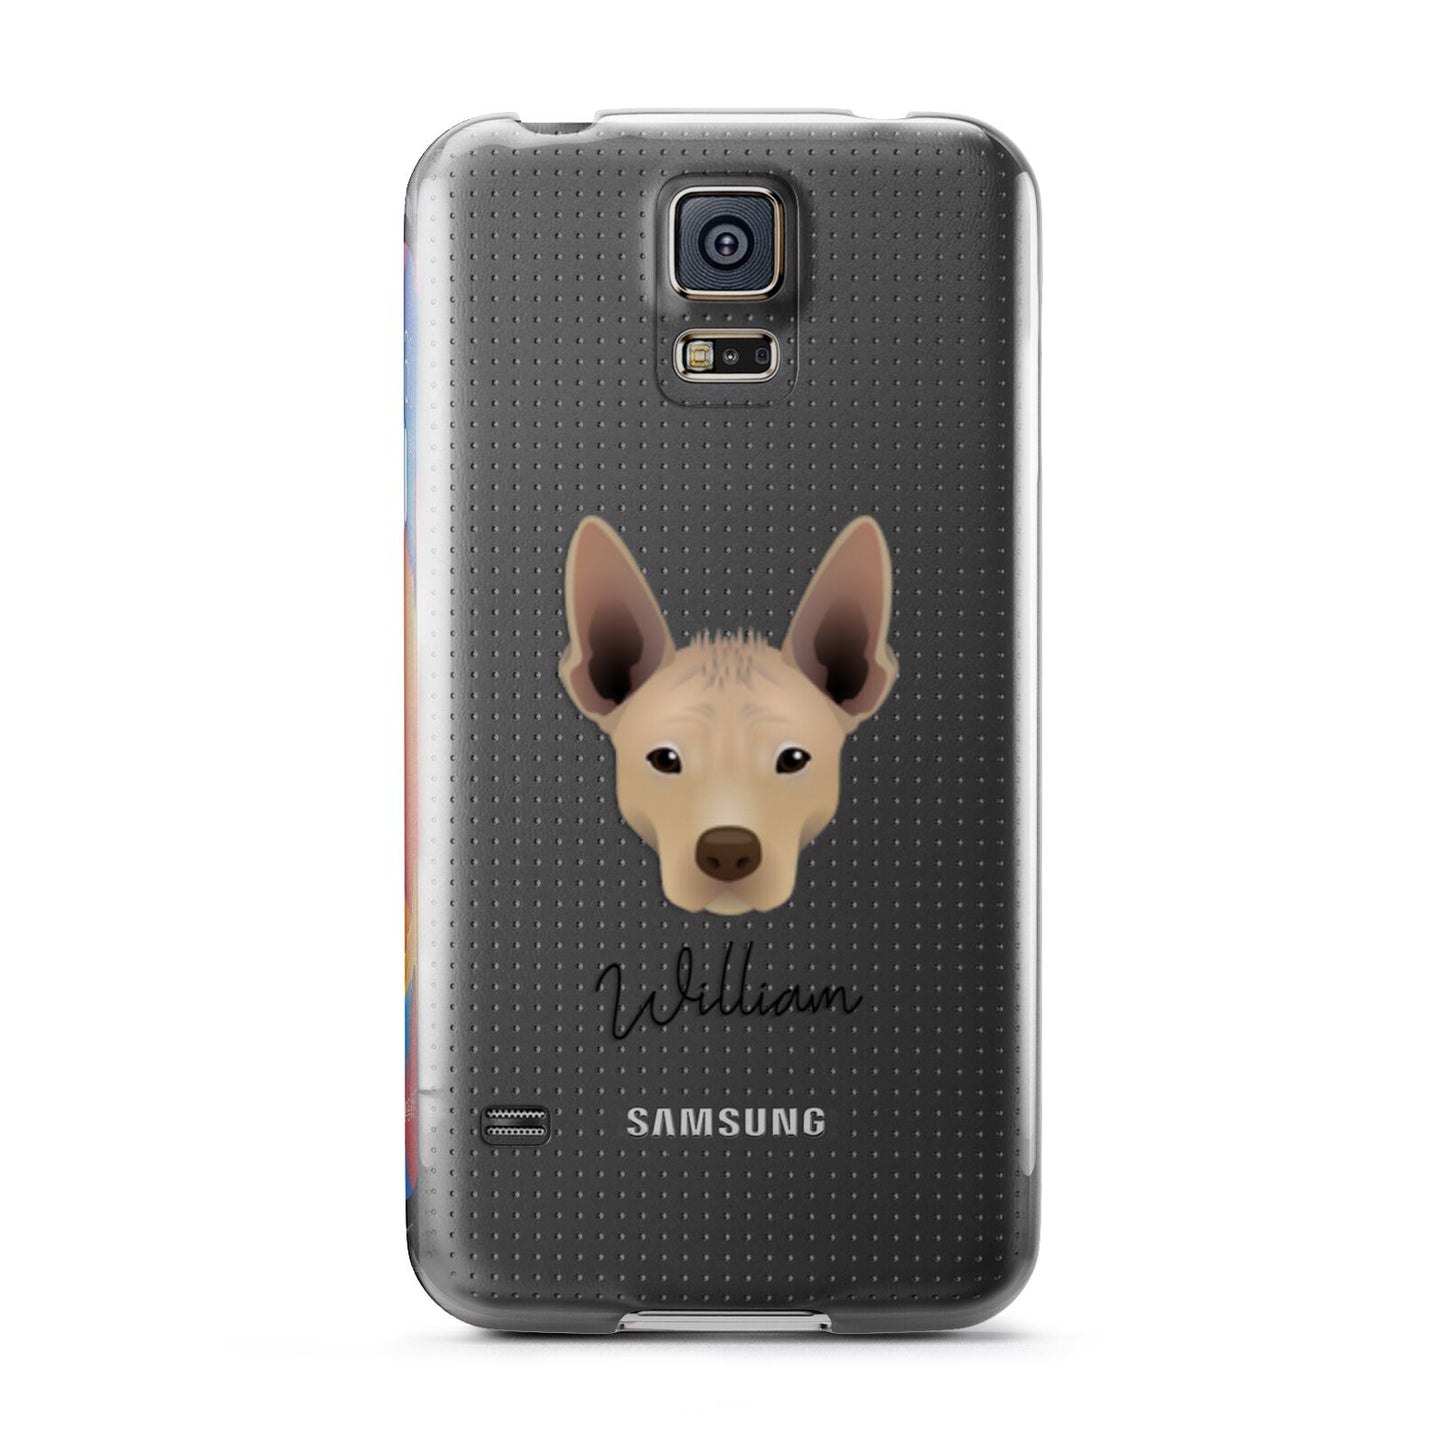 Mexican Hairless Personalised Samsung Galaxy S5 Case